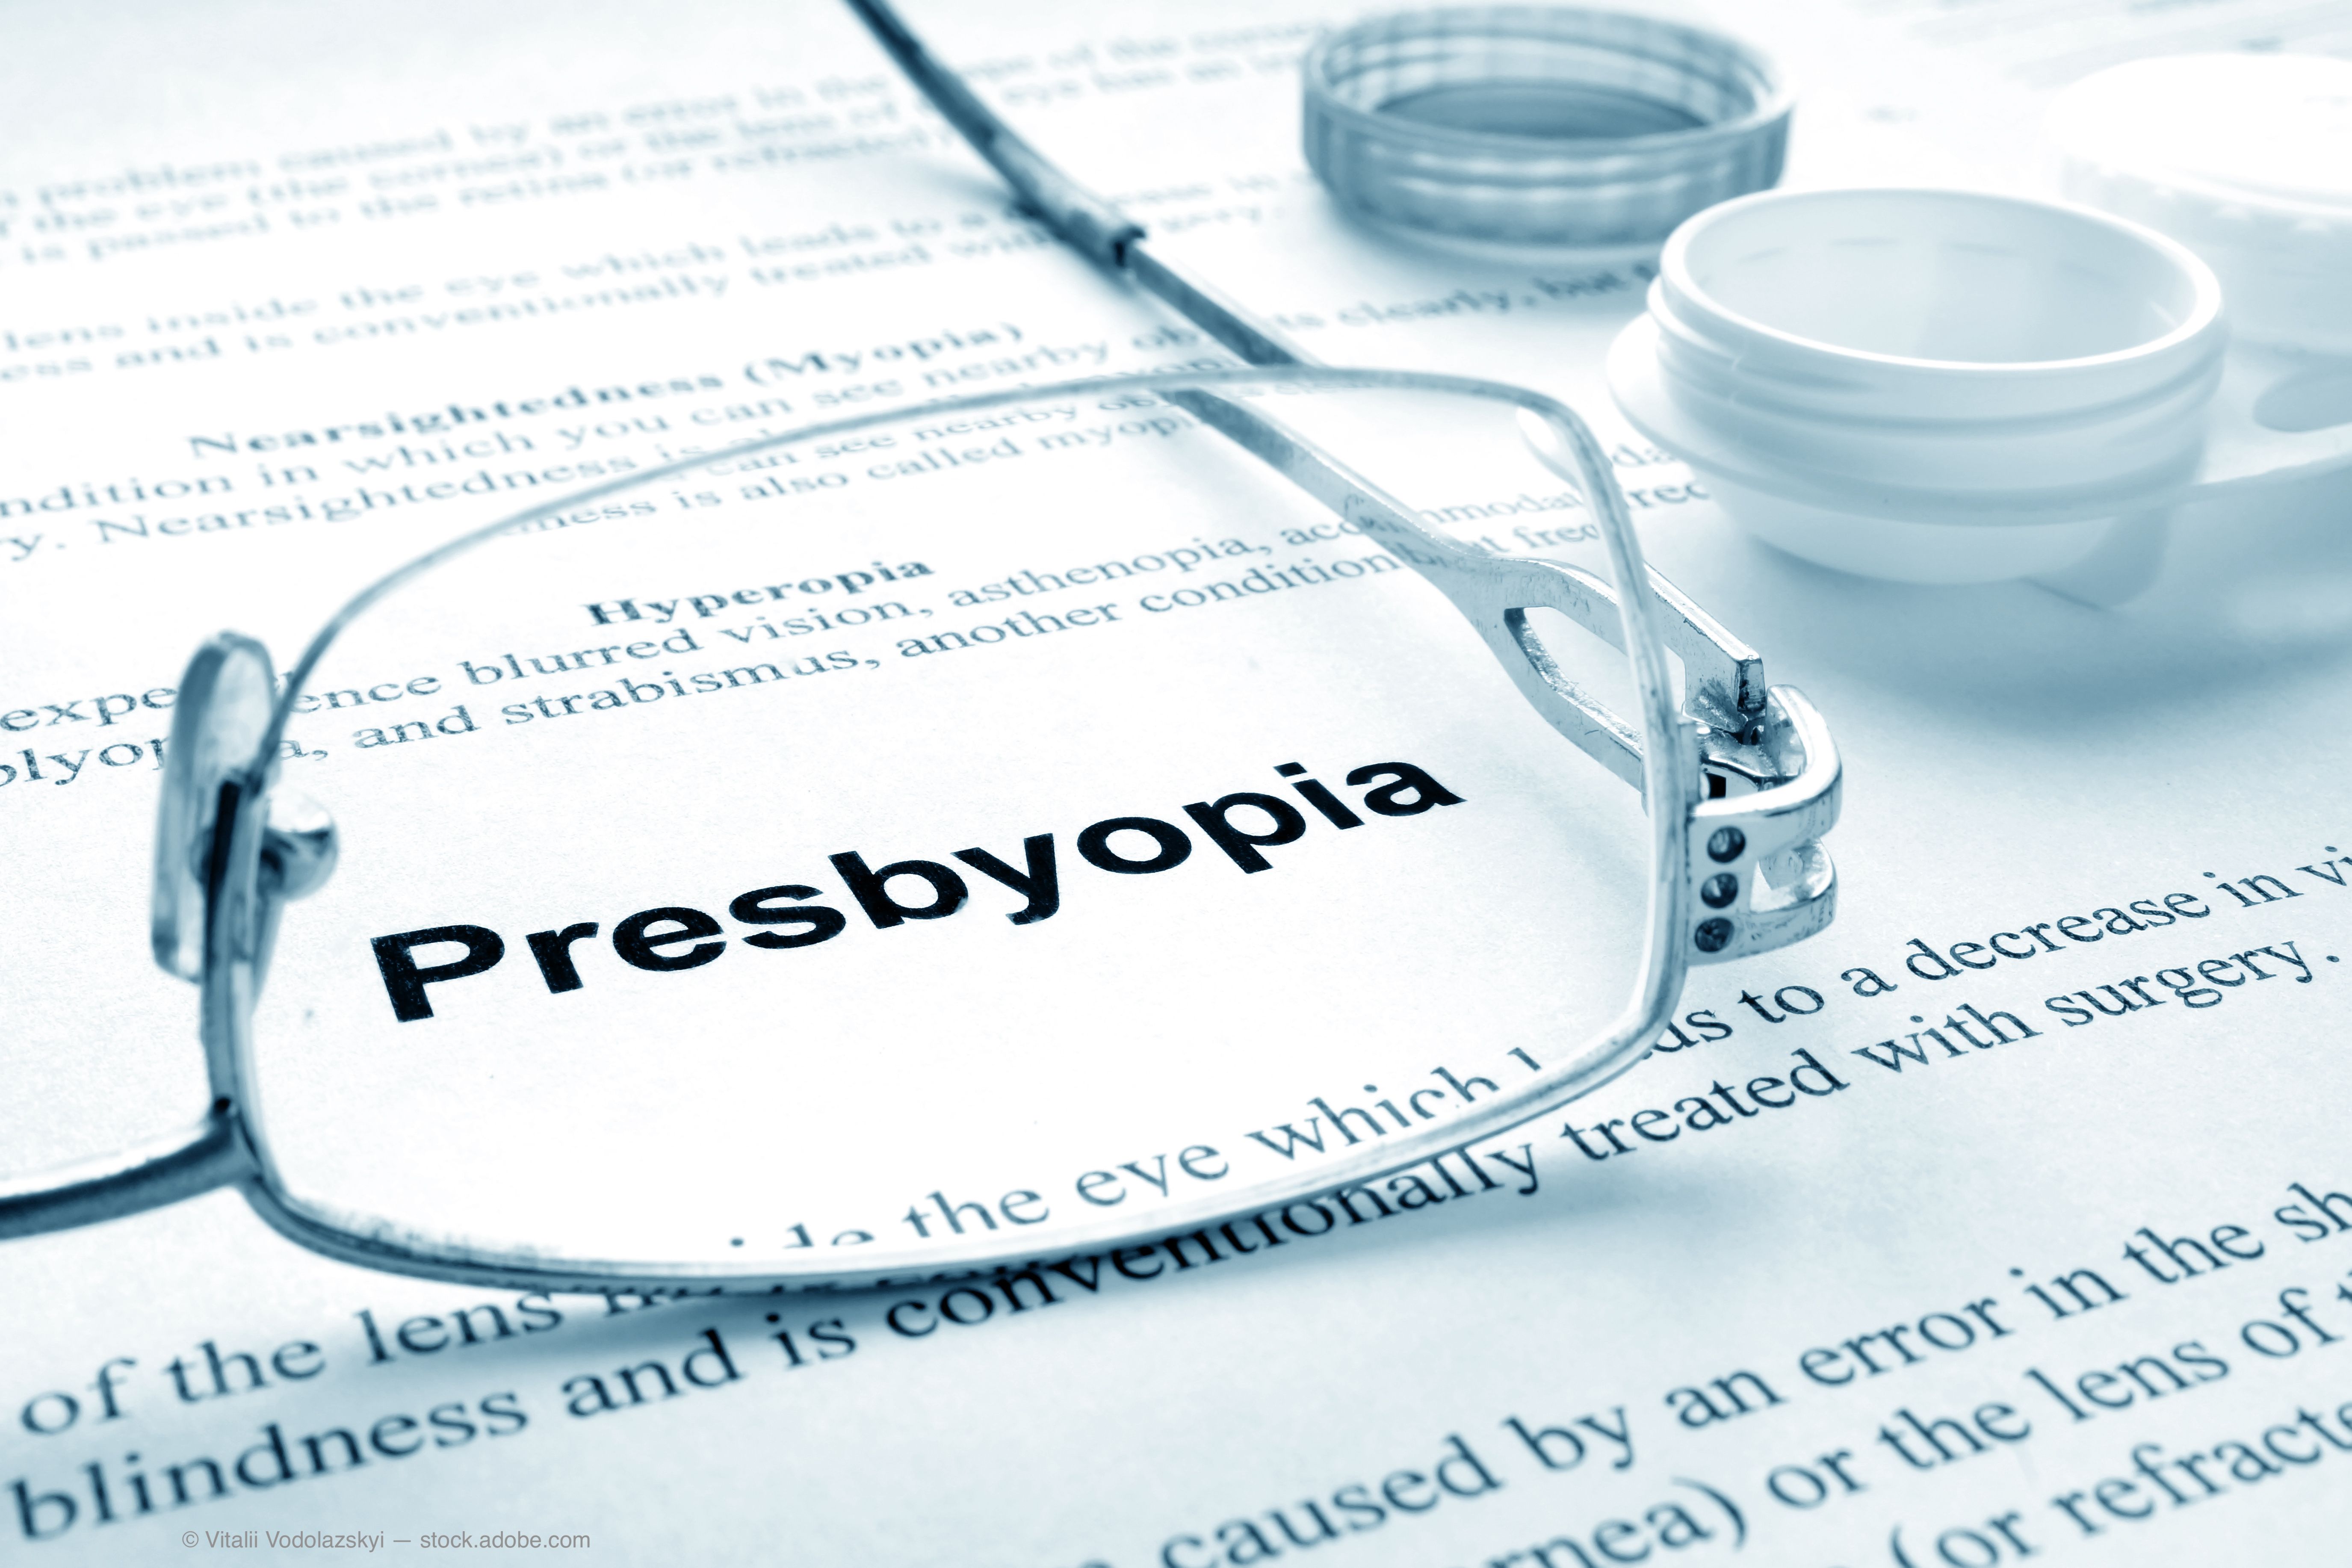 Is presbyopia the newest subspecialty?